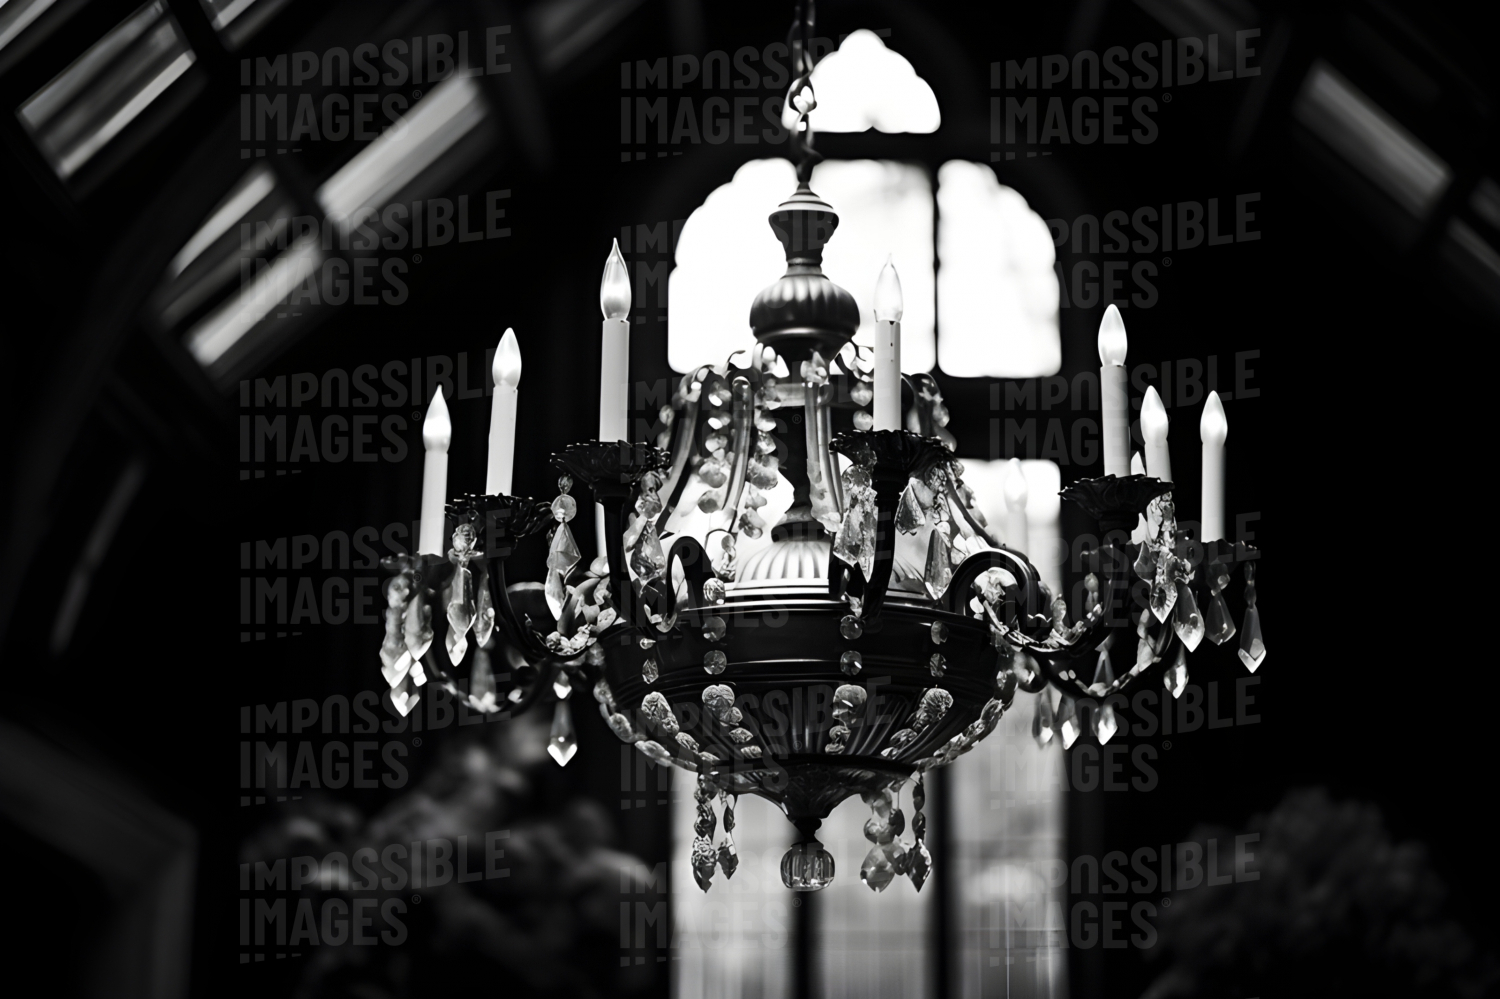 High contrastblack and white photo of an ornate chandelier hanging in the halway of a stately home